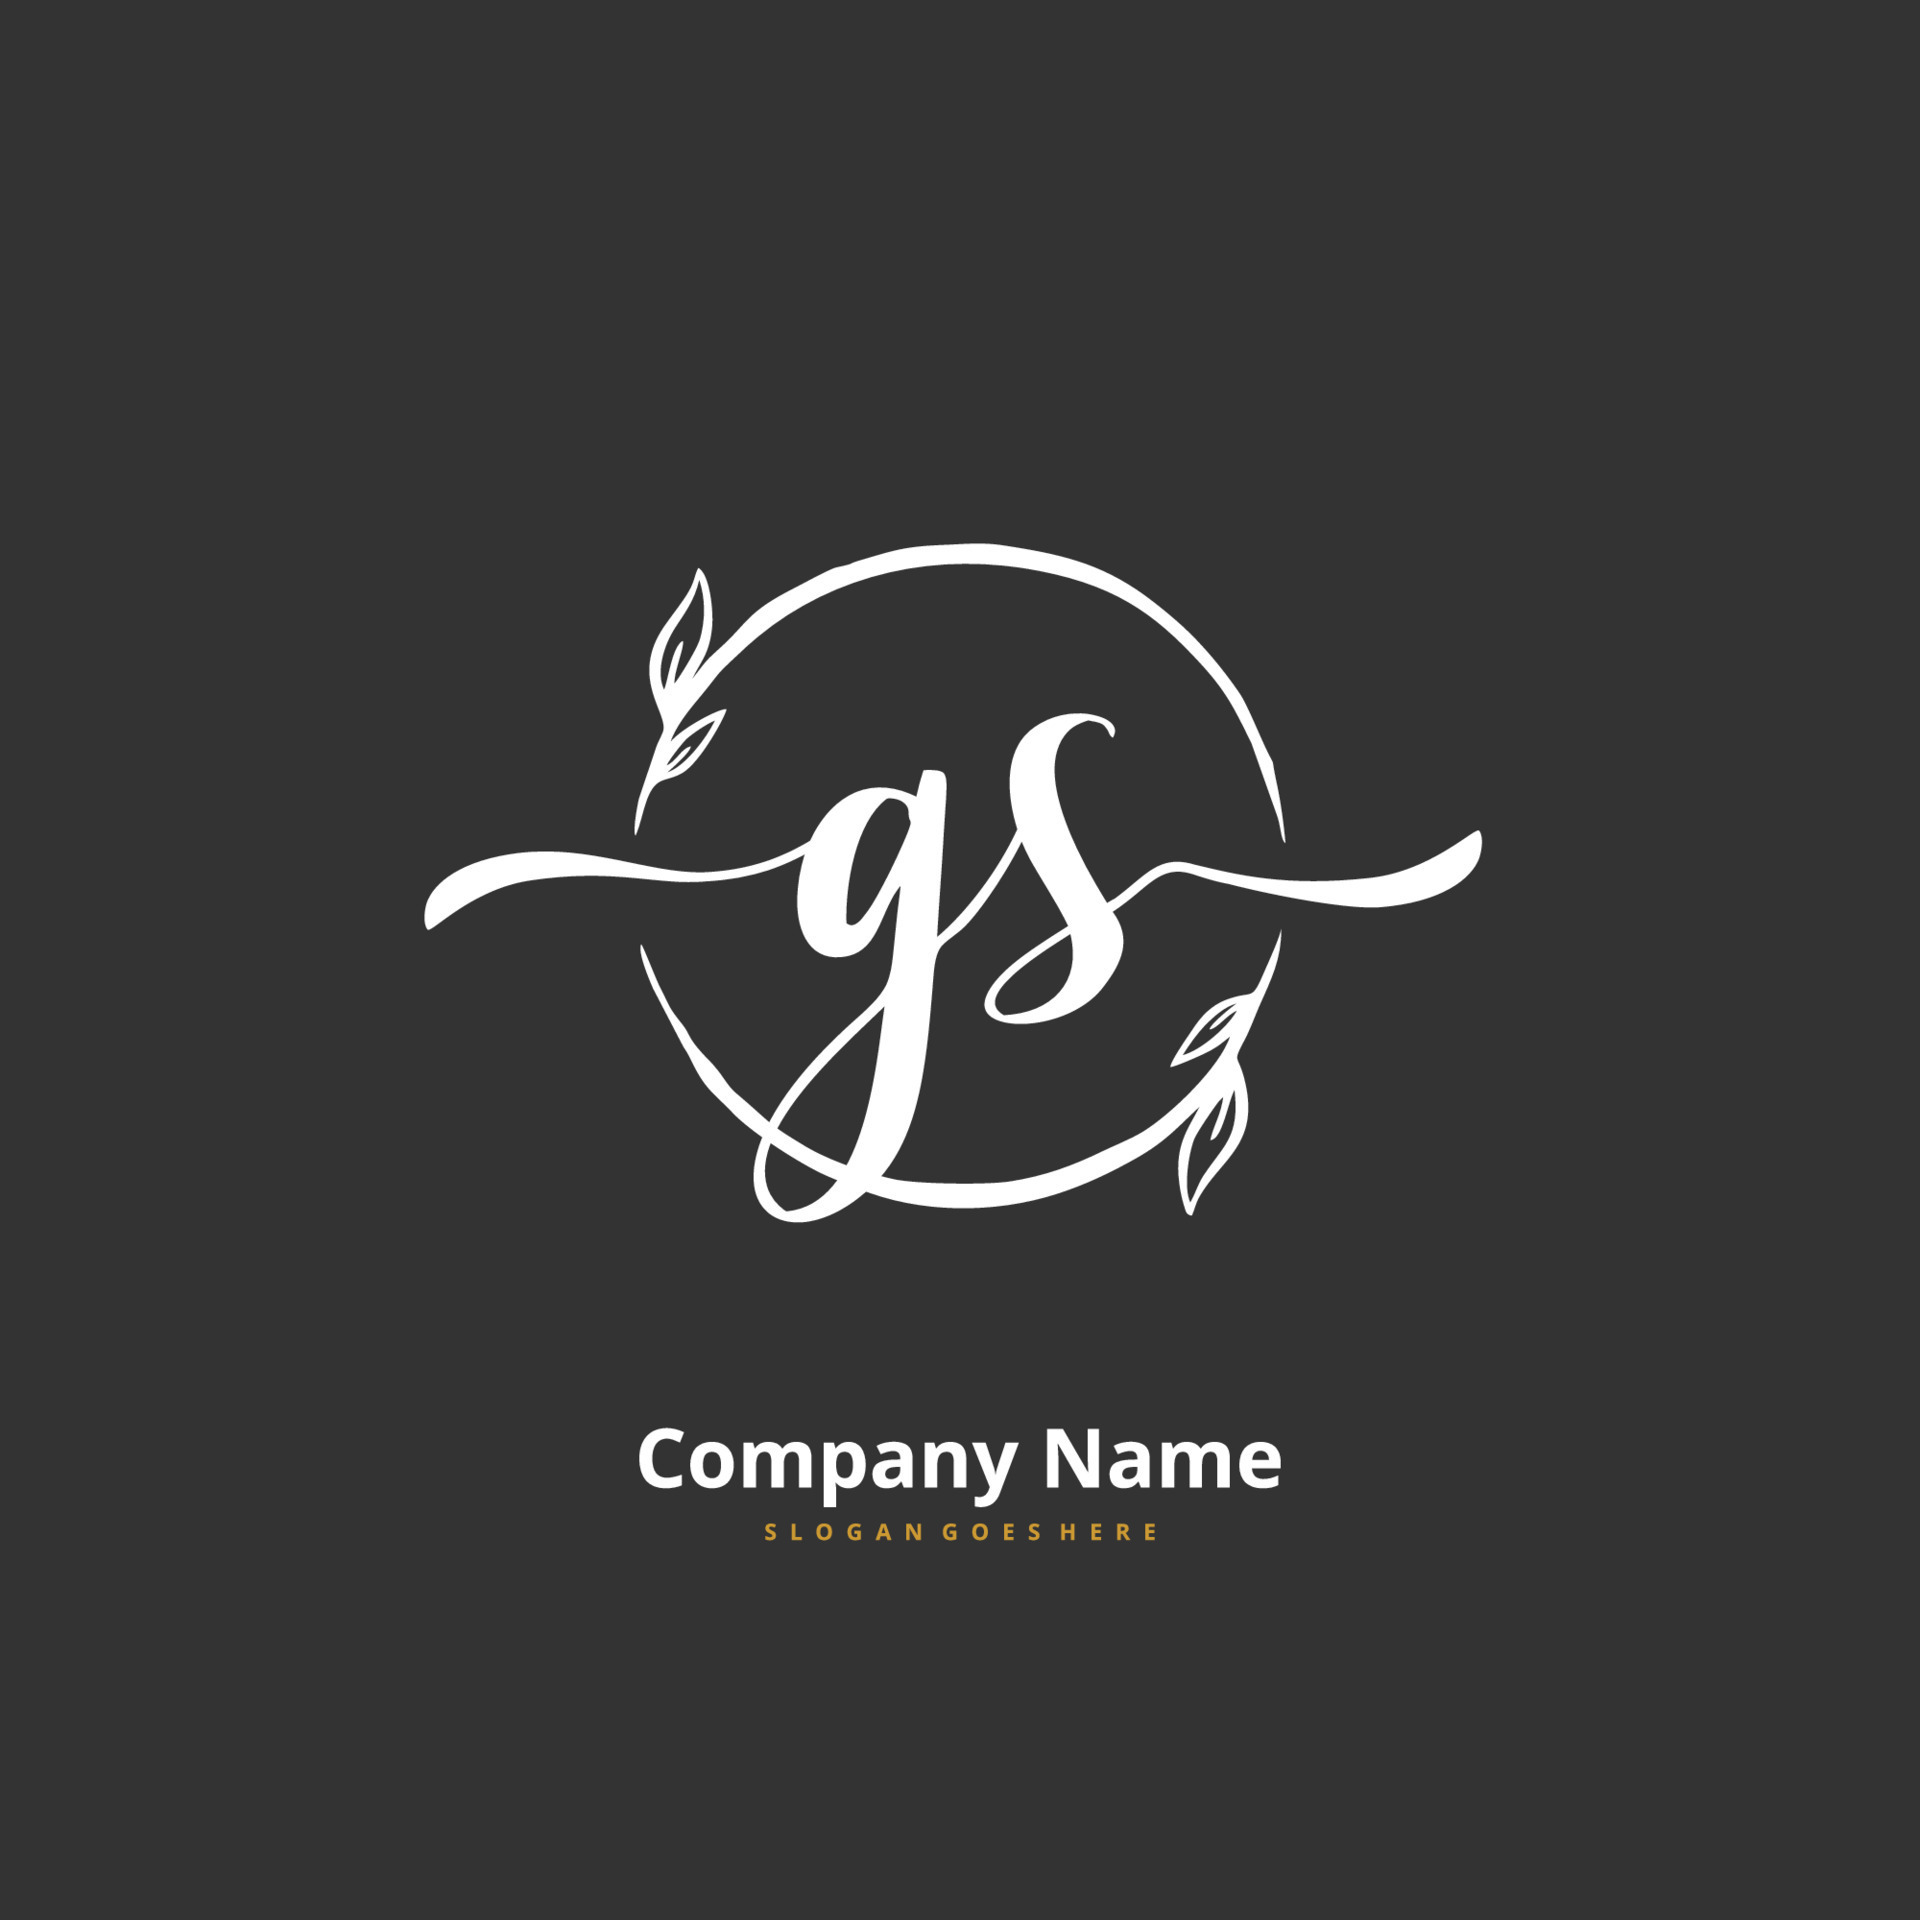 Professional GS Letter Logo Design For Your Business - Brand Identity